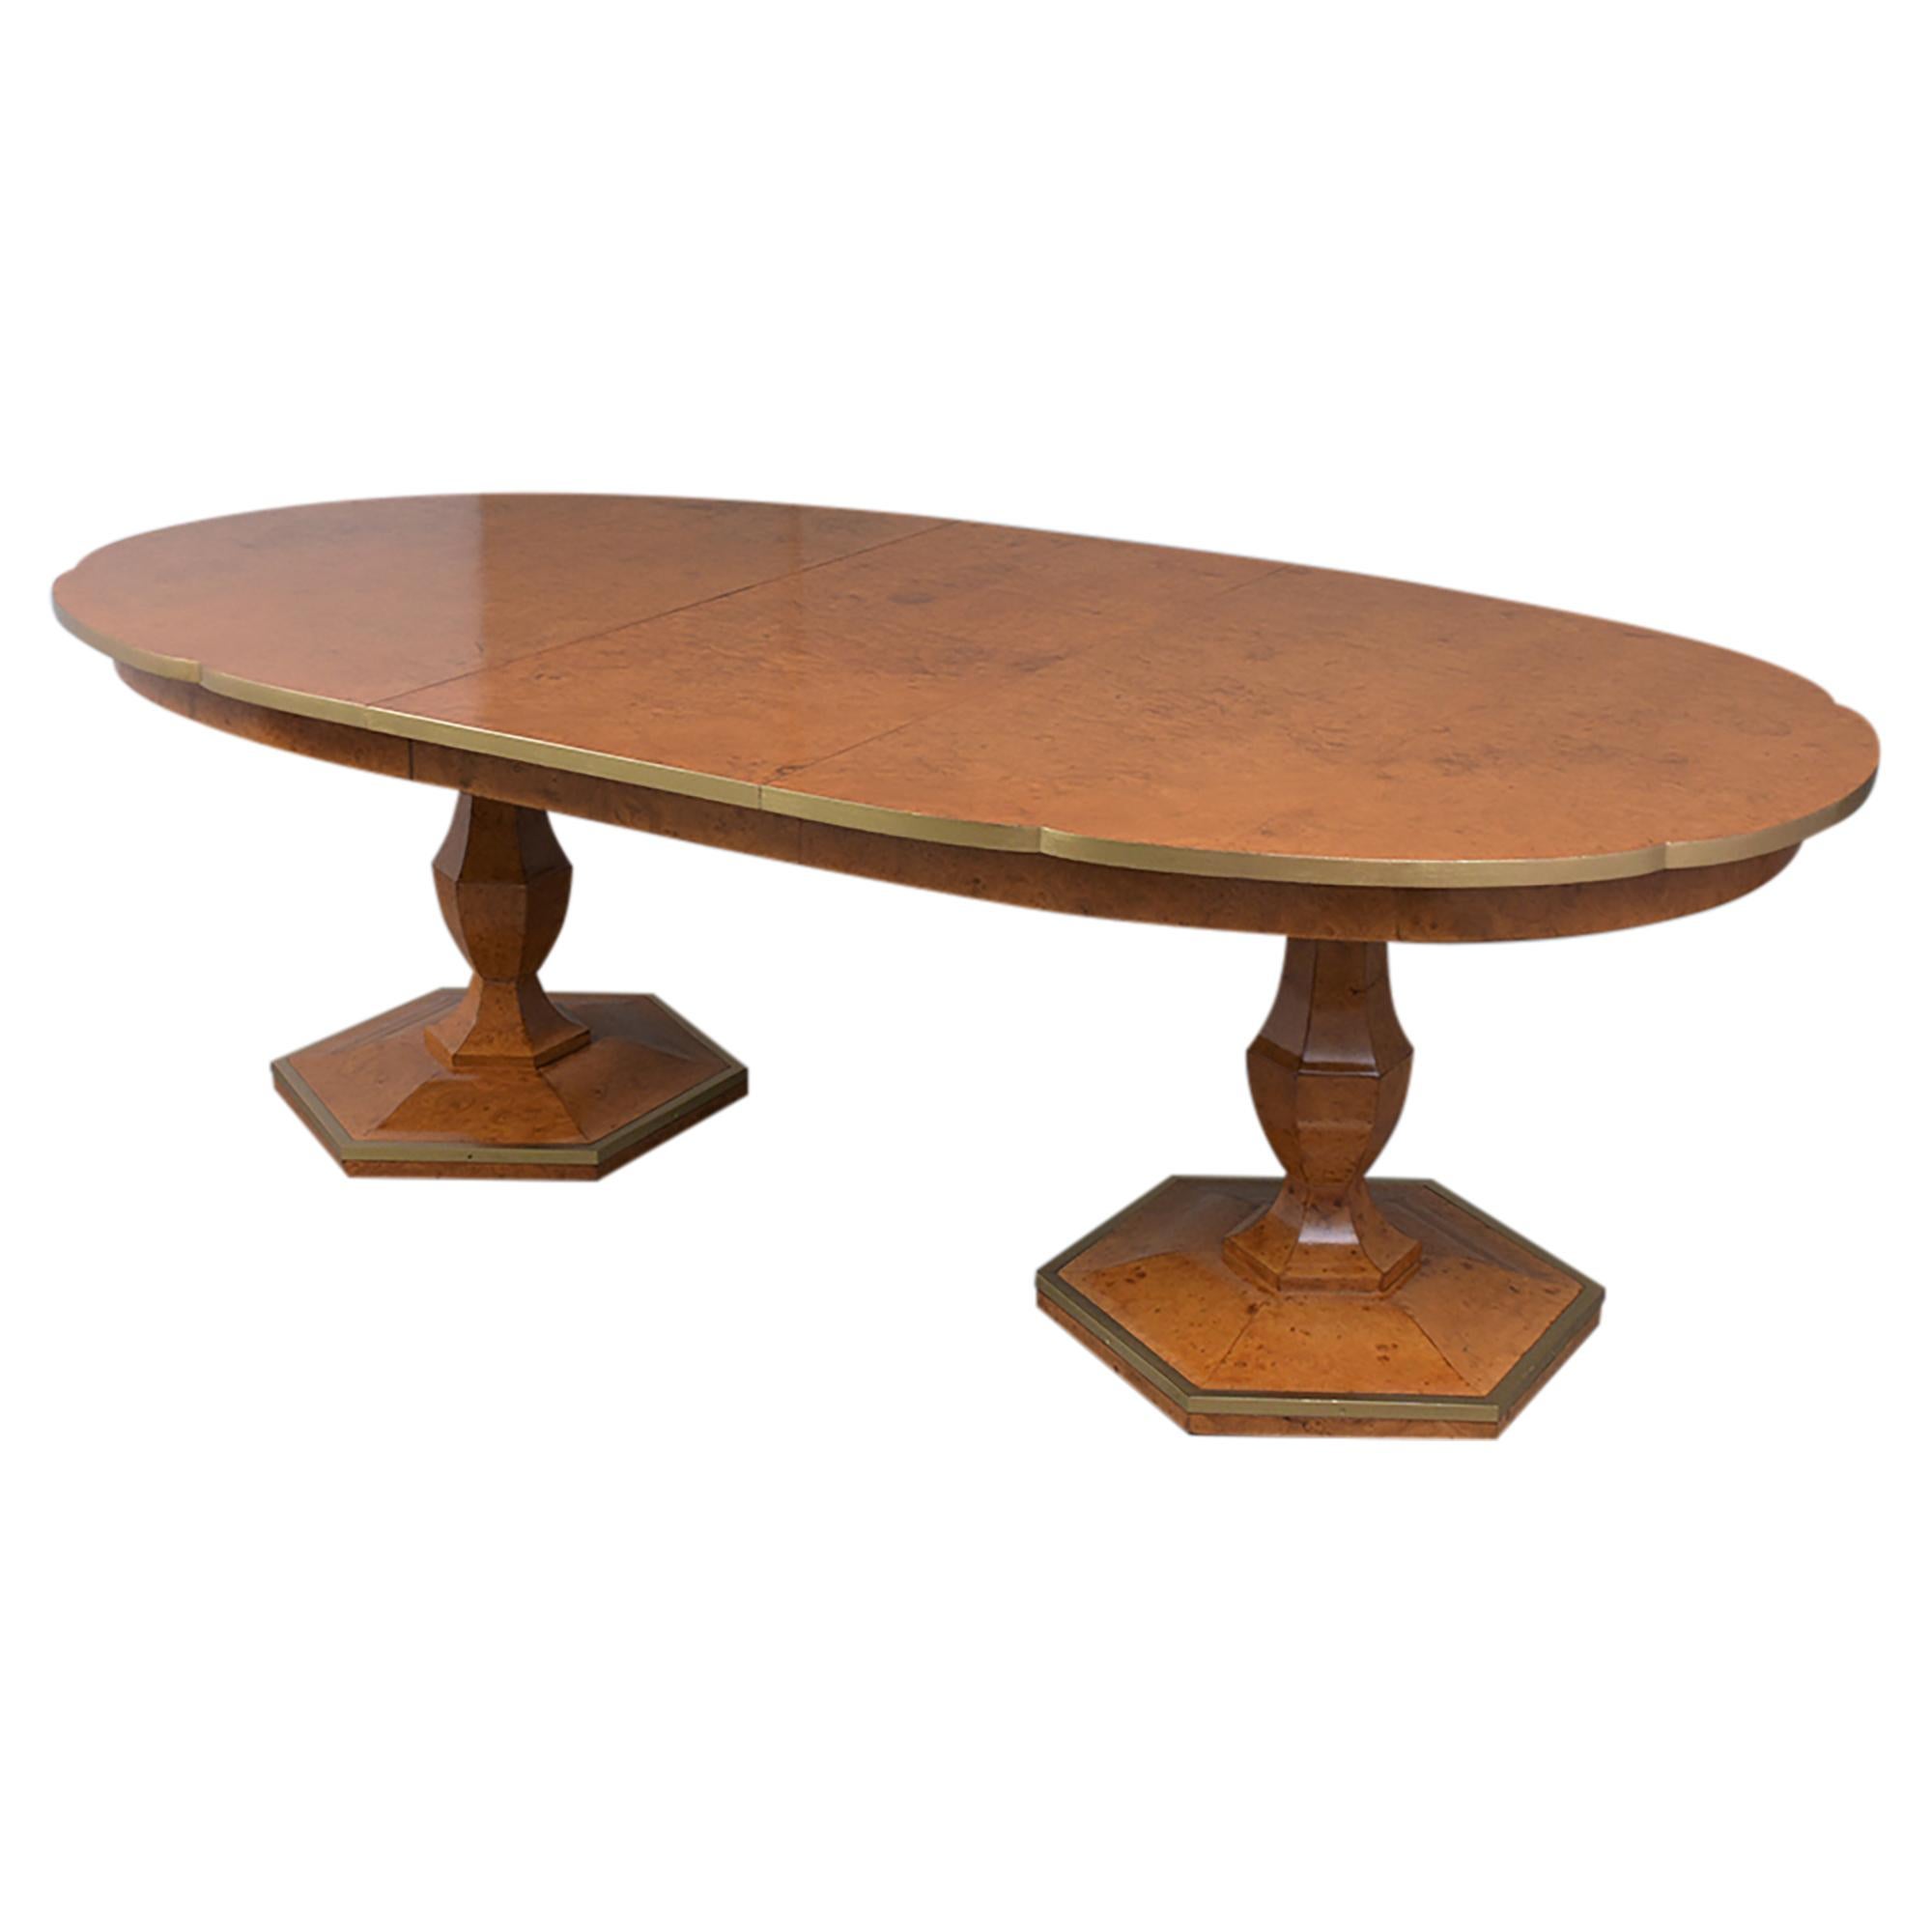 This vintage mid-Century modern dining table has been professionally restored and is hand-crafted out of wood covered in an exotic burl veneer newly stained in golden color with gilt accents and a lacquered finish. The table had a unique curved edge